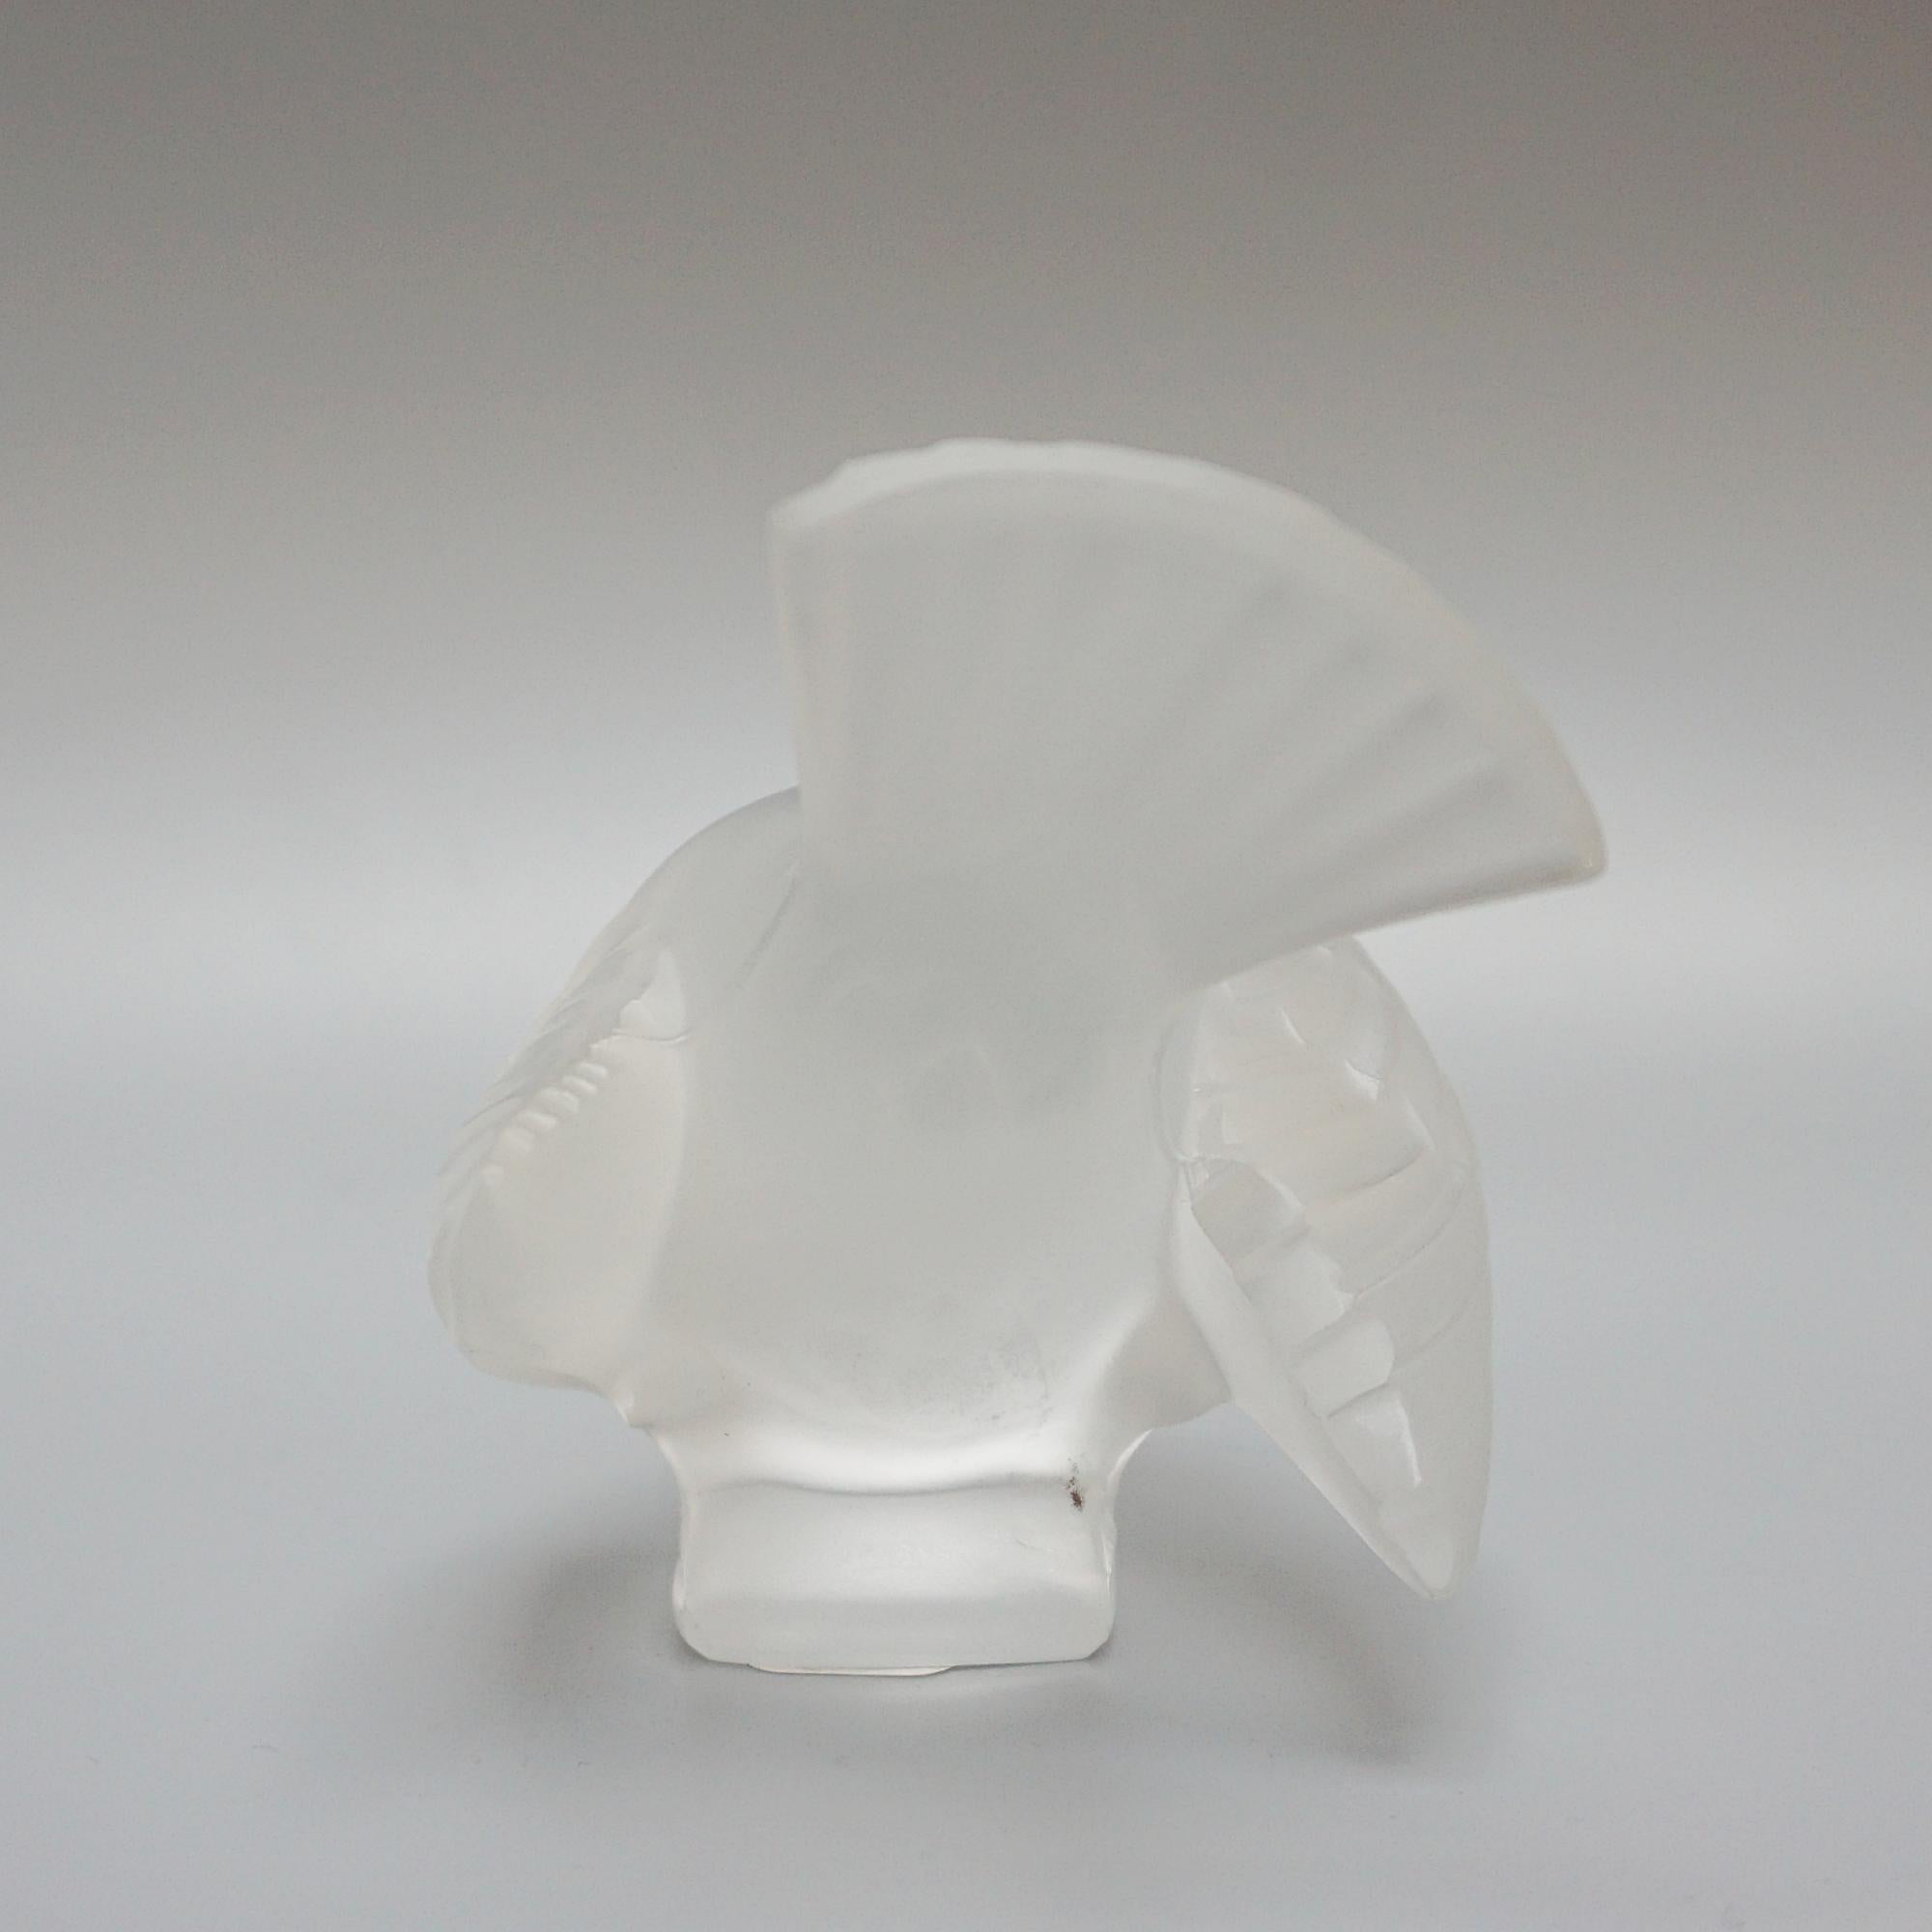 Mid-20th Century 'Moineau Coquet' A Glass Bird Paperweight by Marc Lalique (1900 - 1977) For Sale